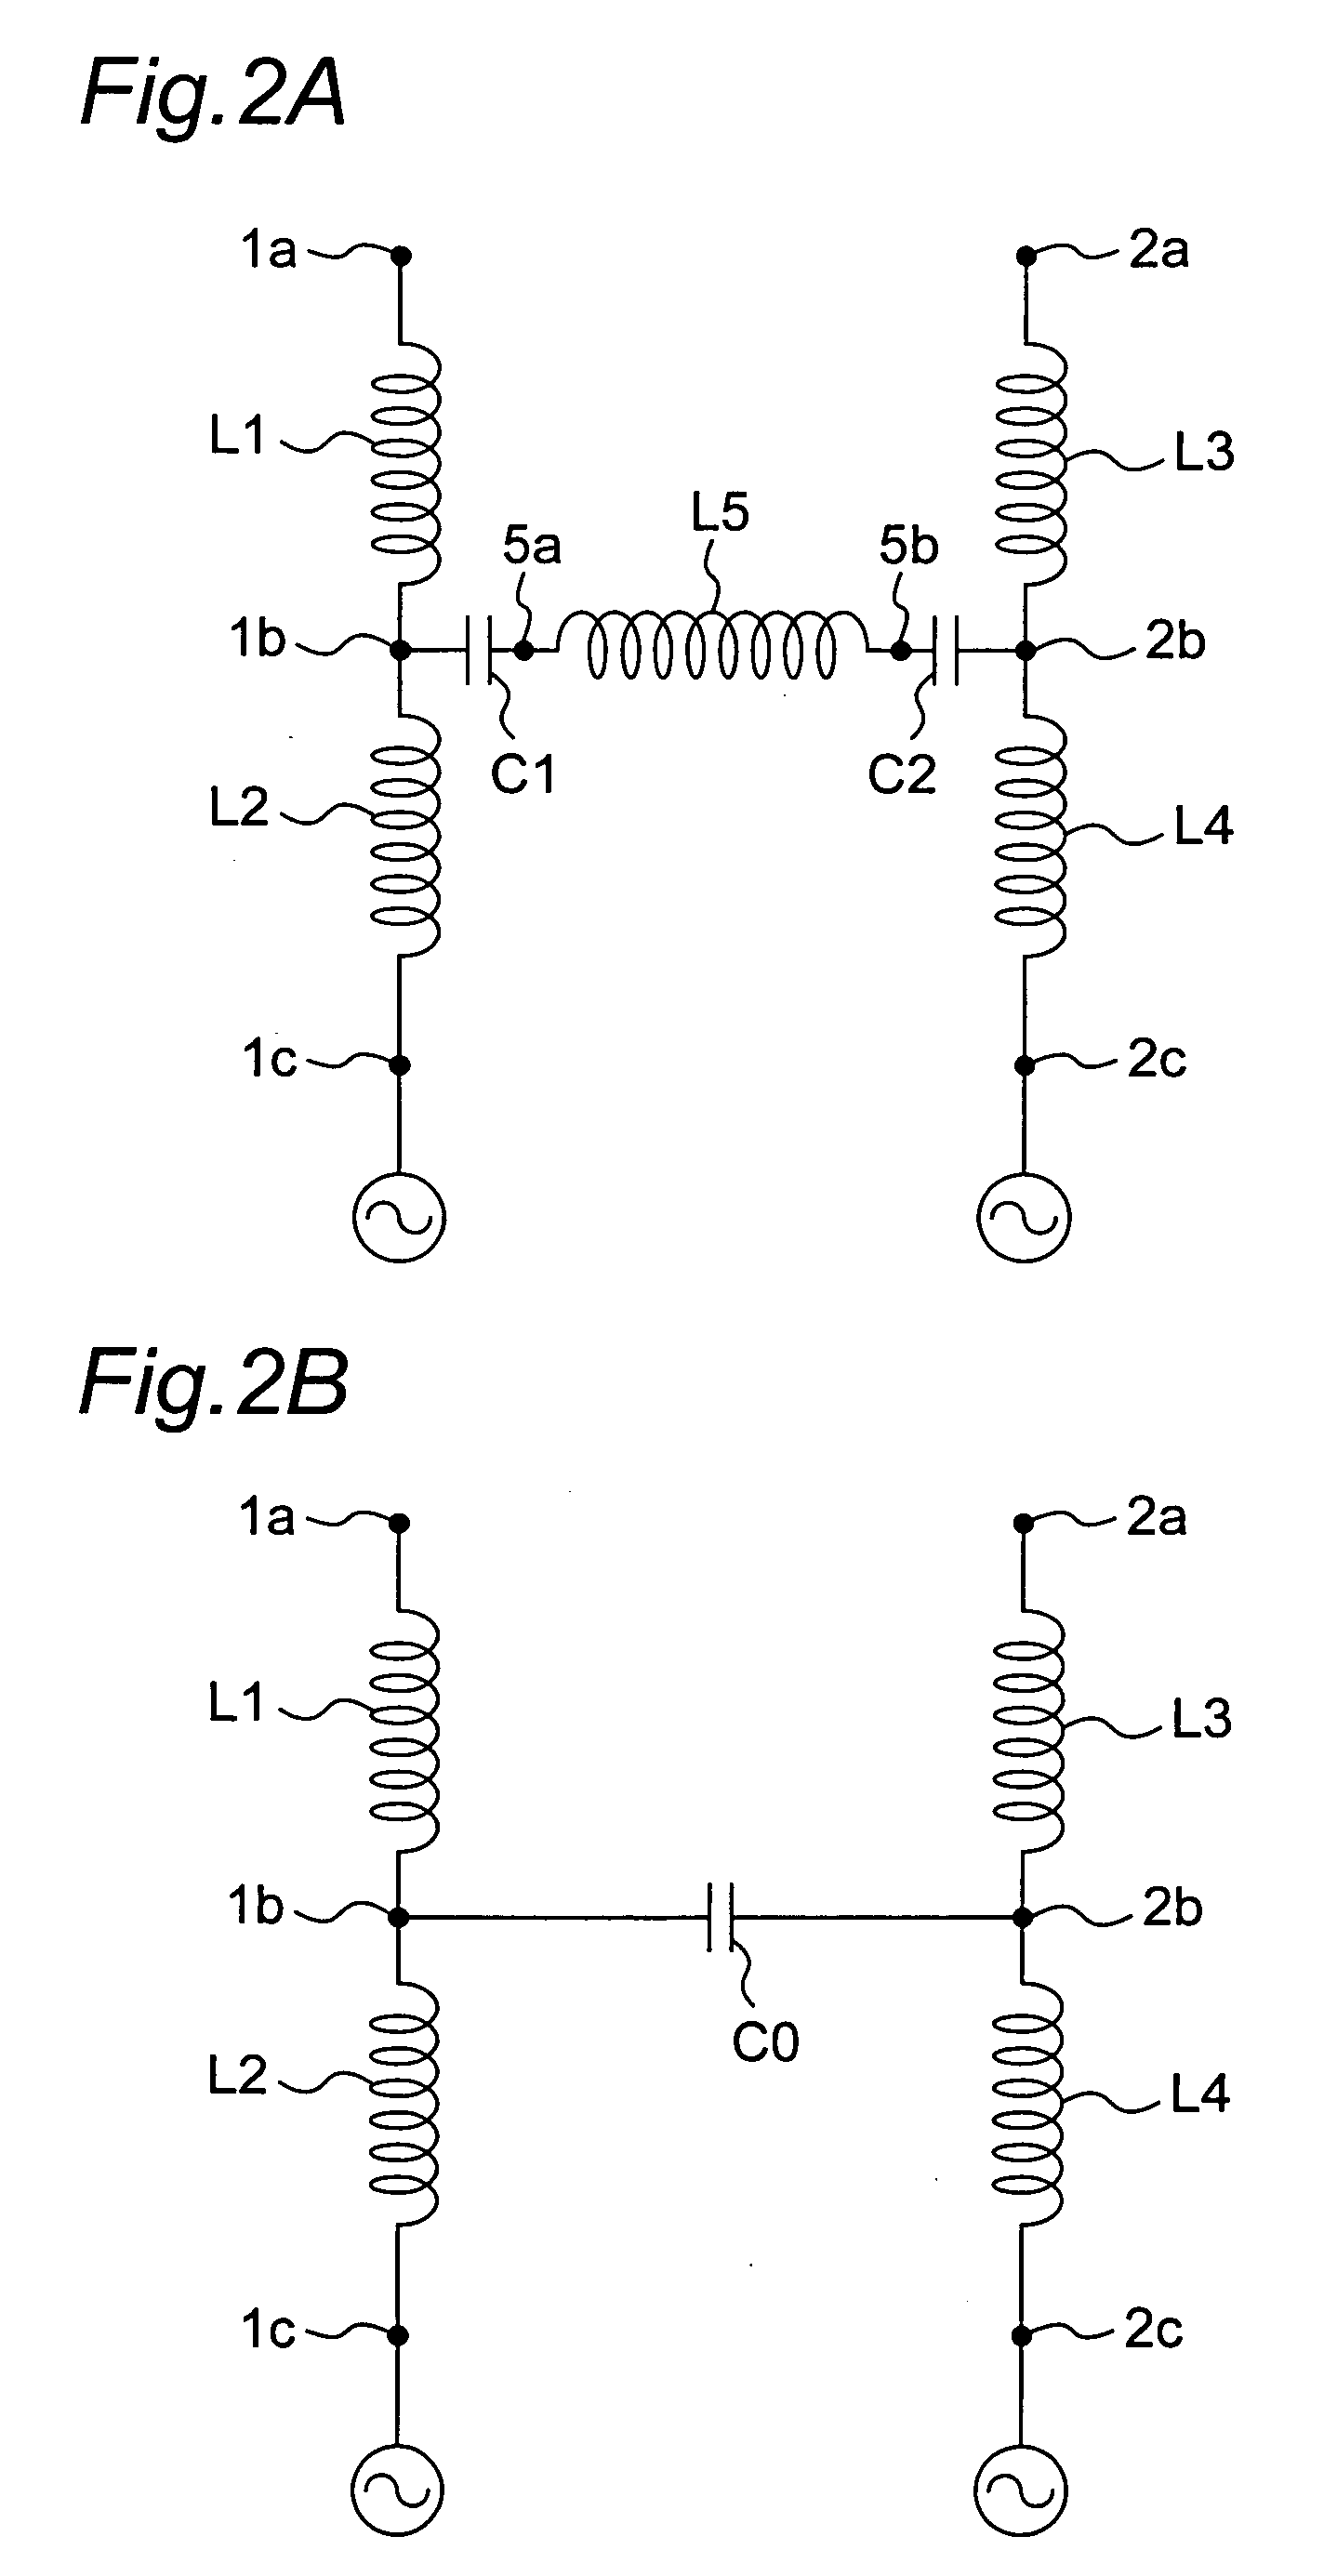 Array antenna apparatus having at least two feeding elements and operable in multiple frequency bands